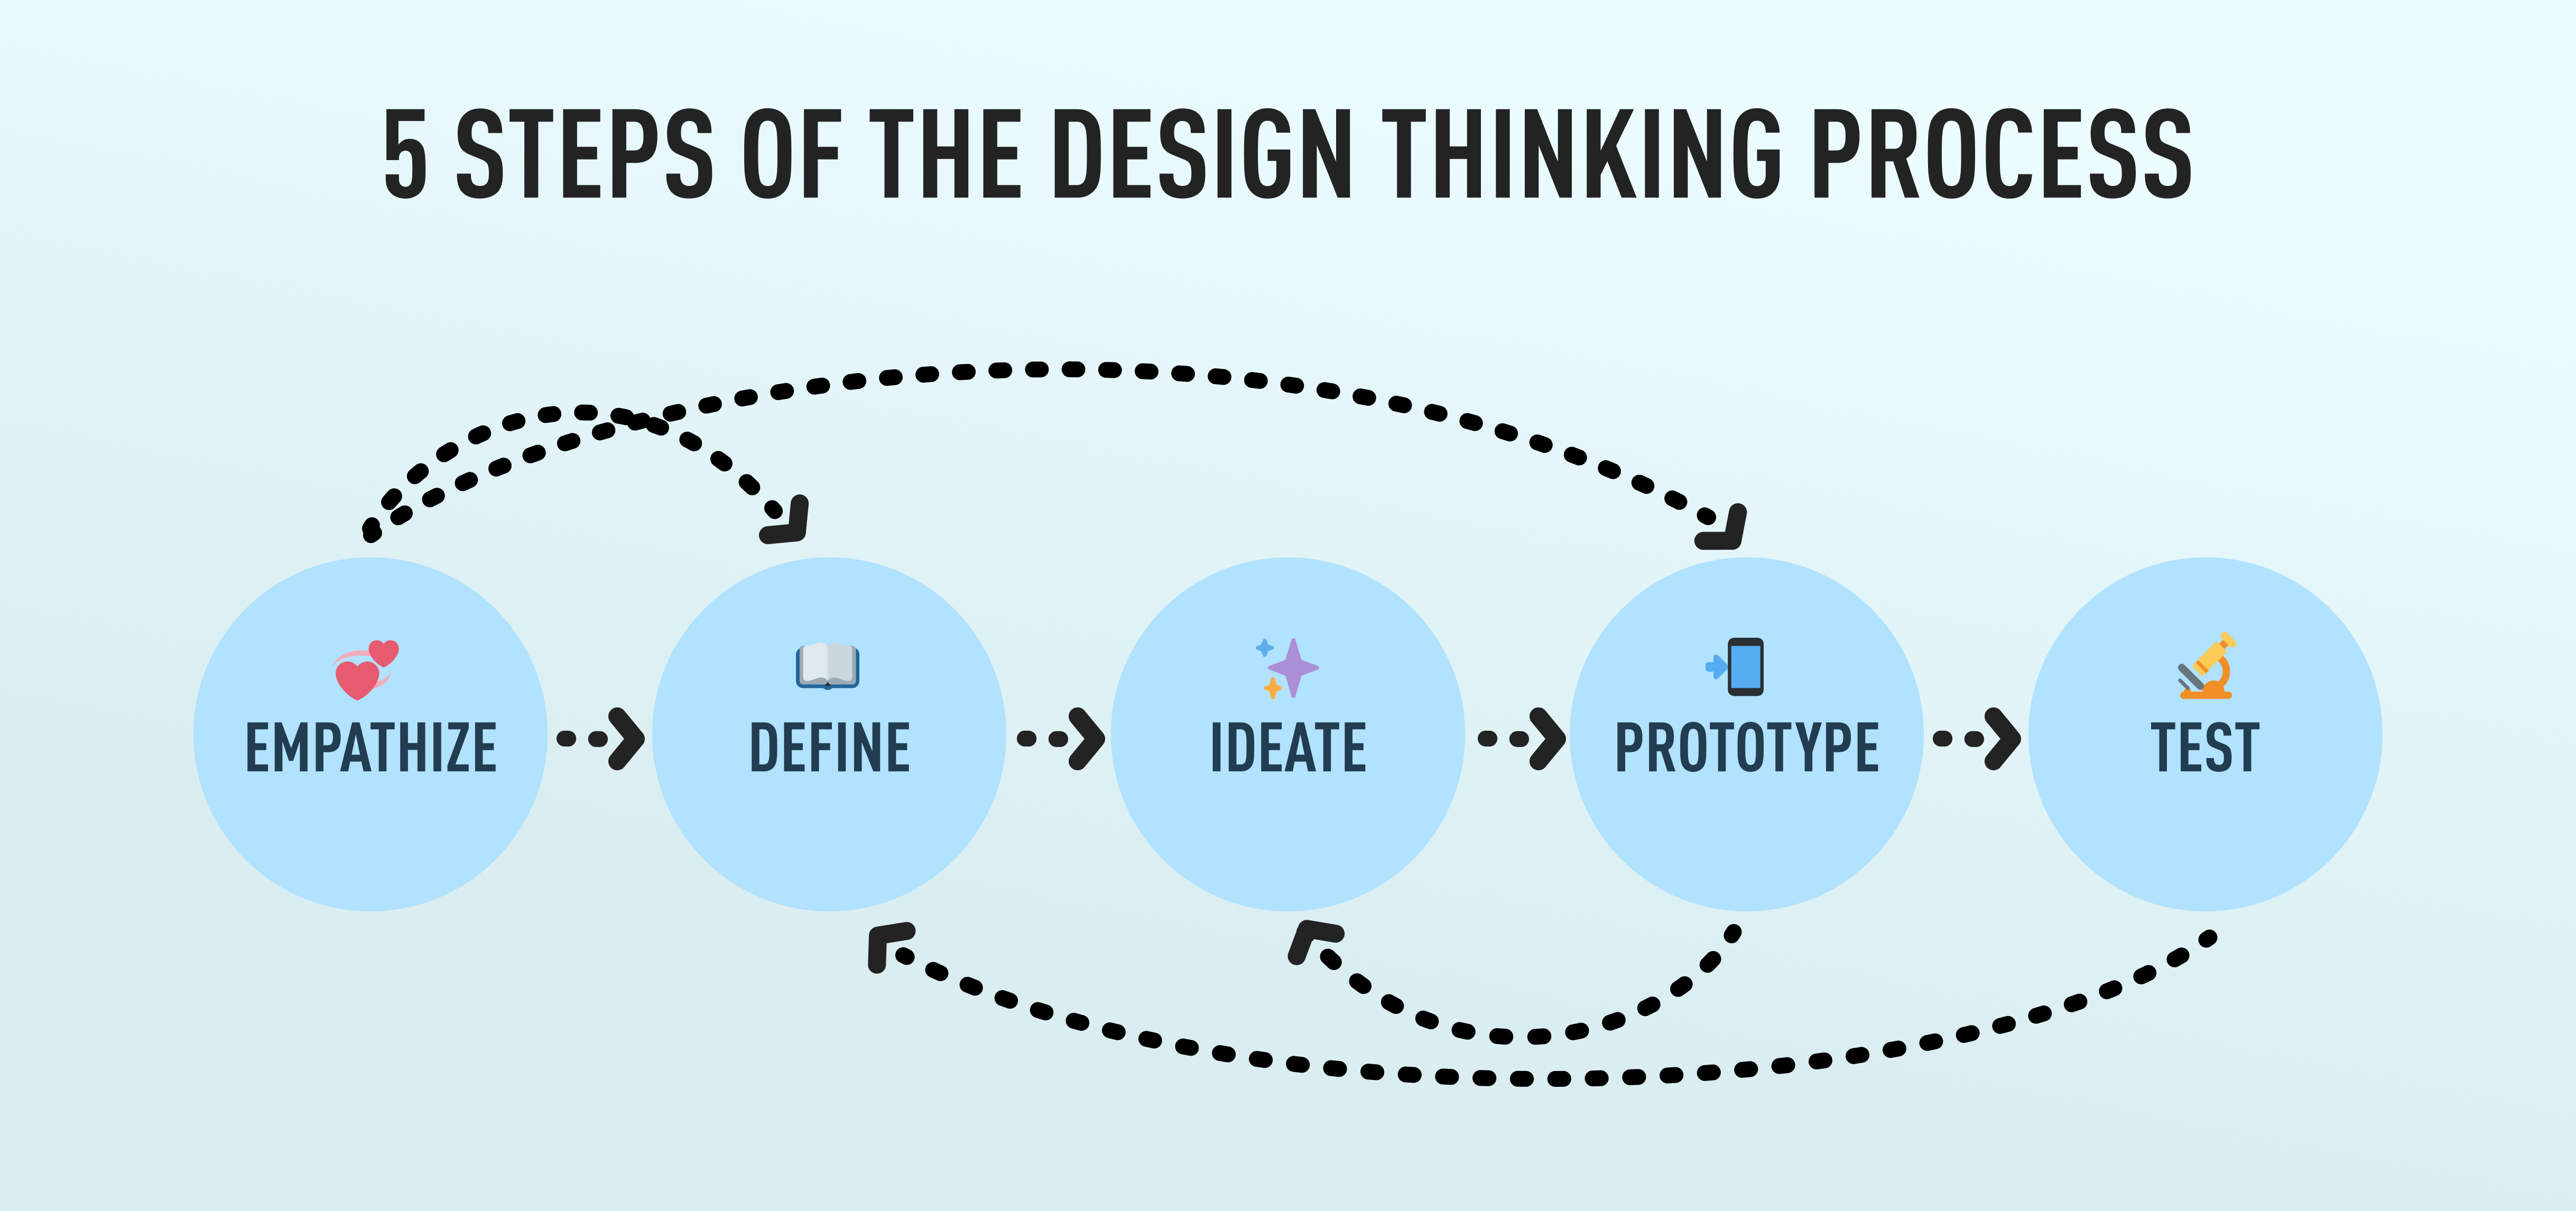 Diagram of the 5 stages of the design thinking process: Empathize, define, ideate, prototype, and test